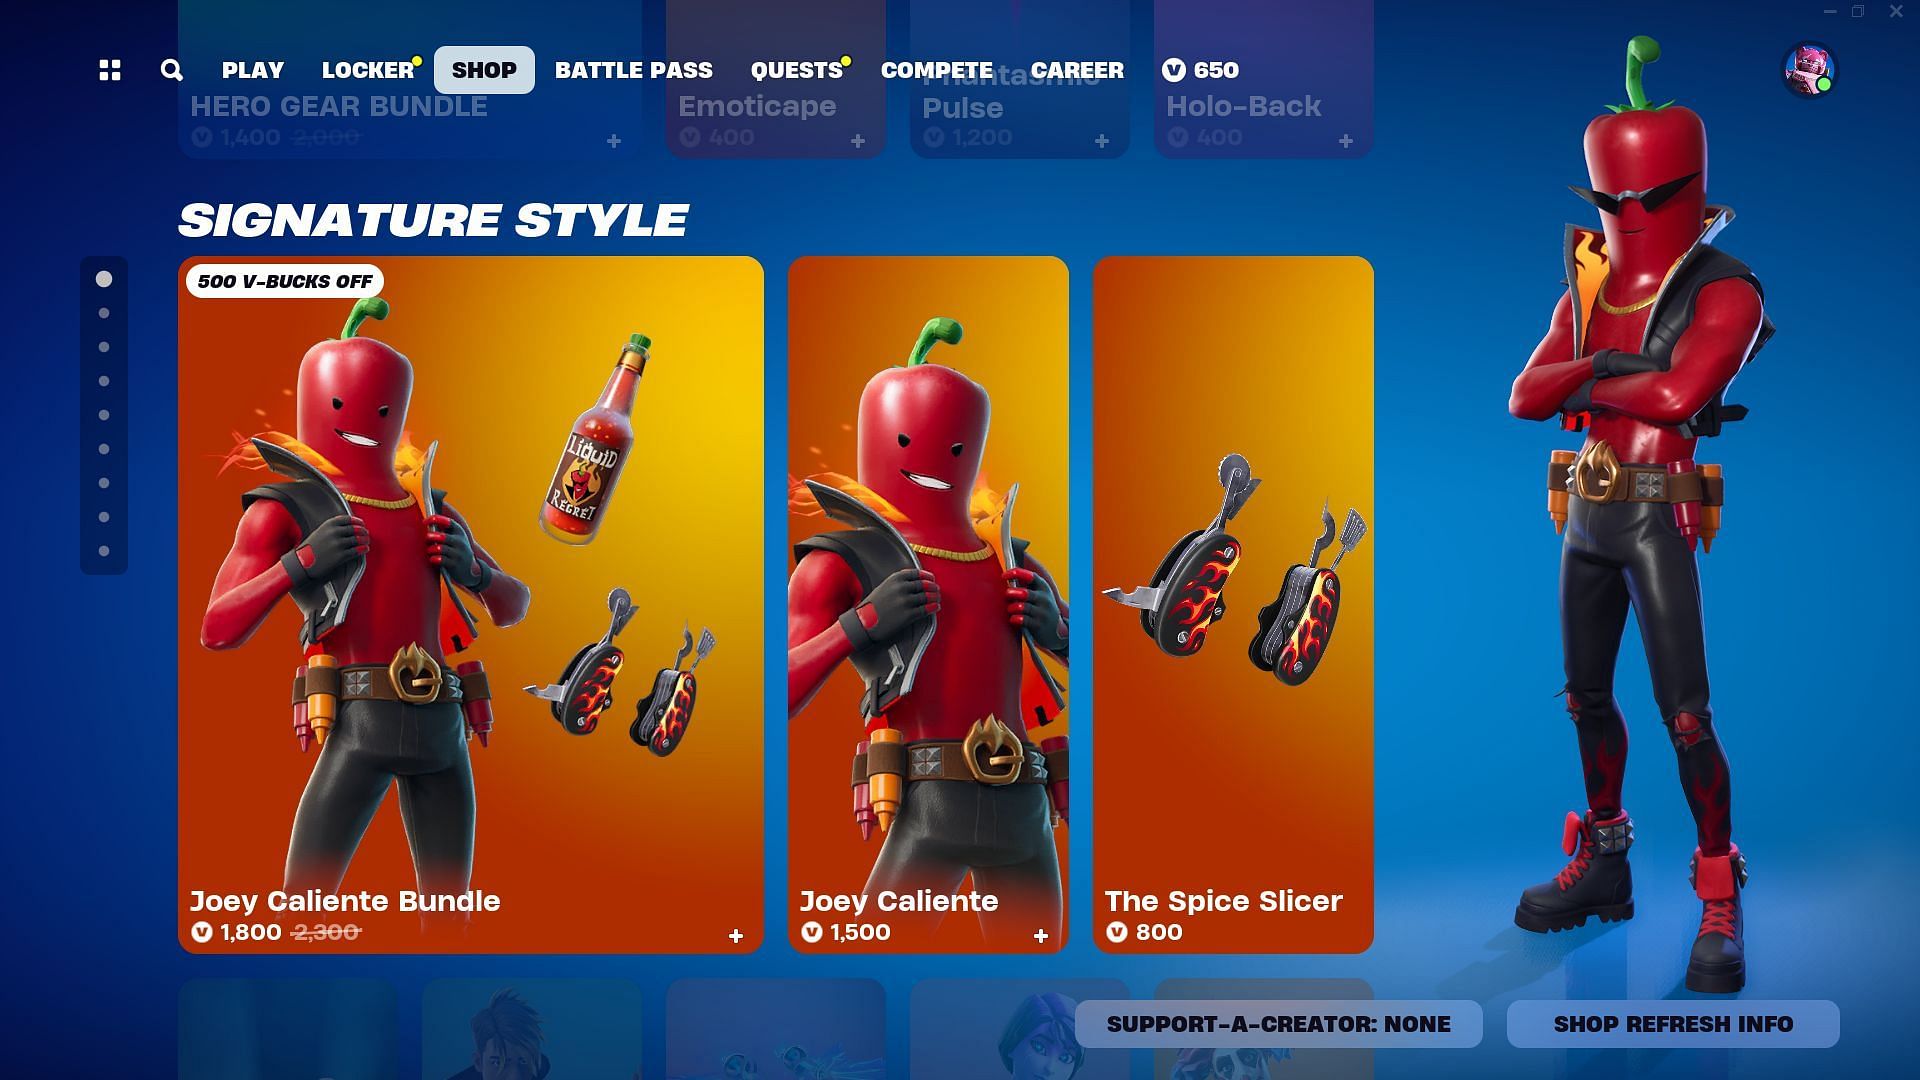 You can now purchase the Joey Caliente skin in Fortnite (Image via Epic Games)